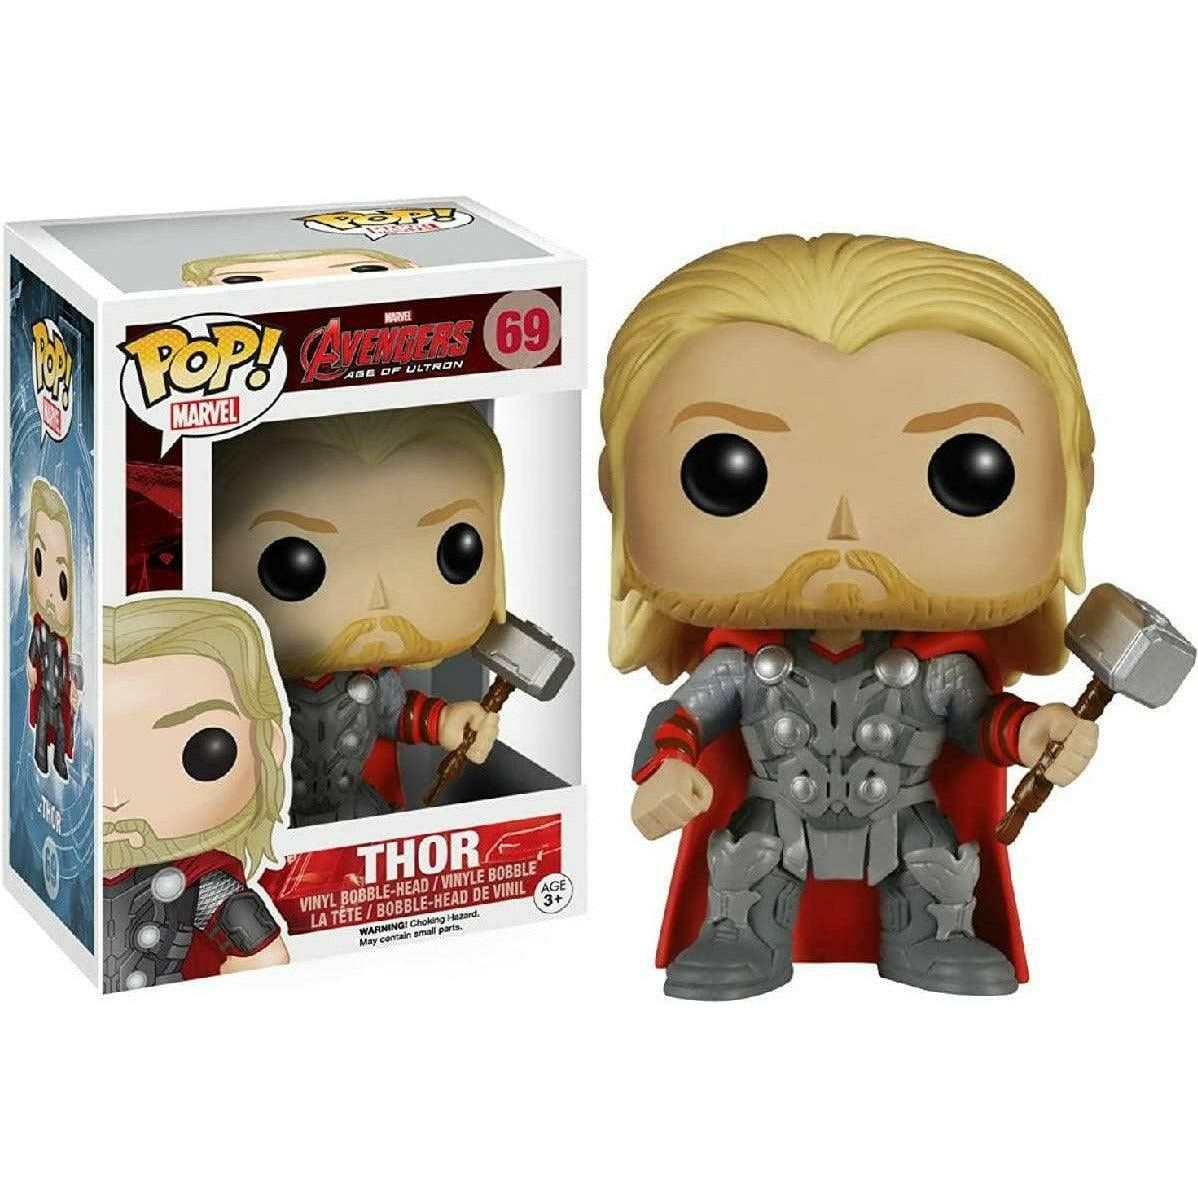 Funko Pop Avengers Age of Ultron - Thor - BumbleToys - 18+, 4+ Years, 5-7 Years, Action Figures, Boys, Funko, Marvel, Pre-Order